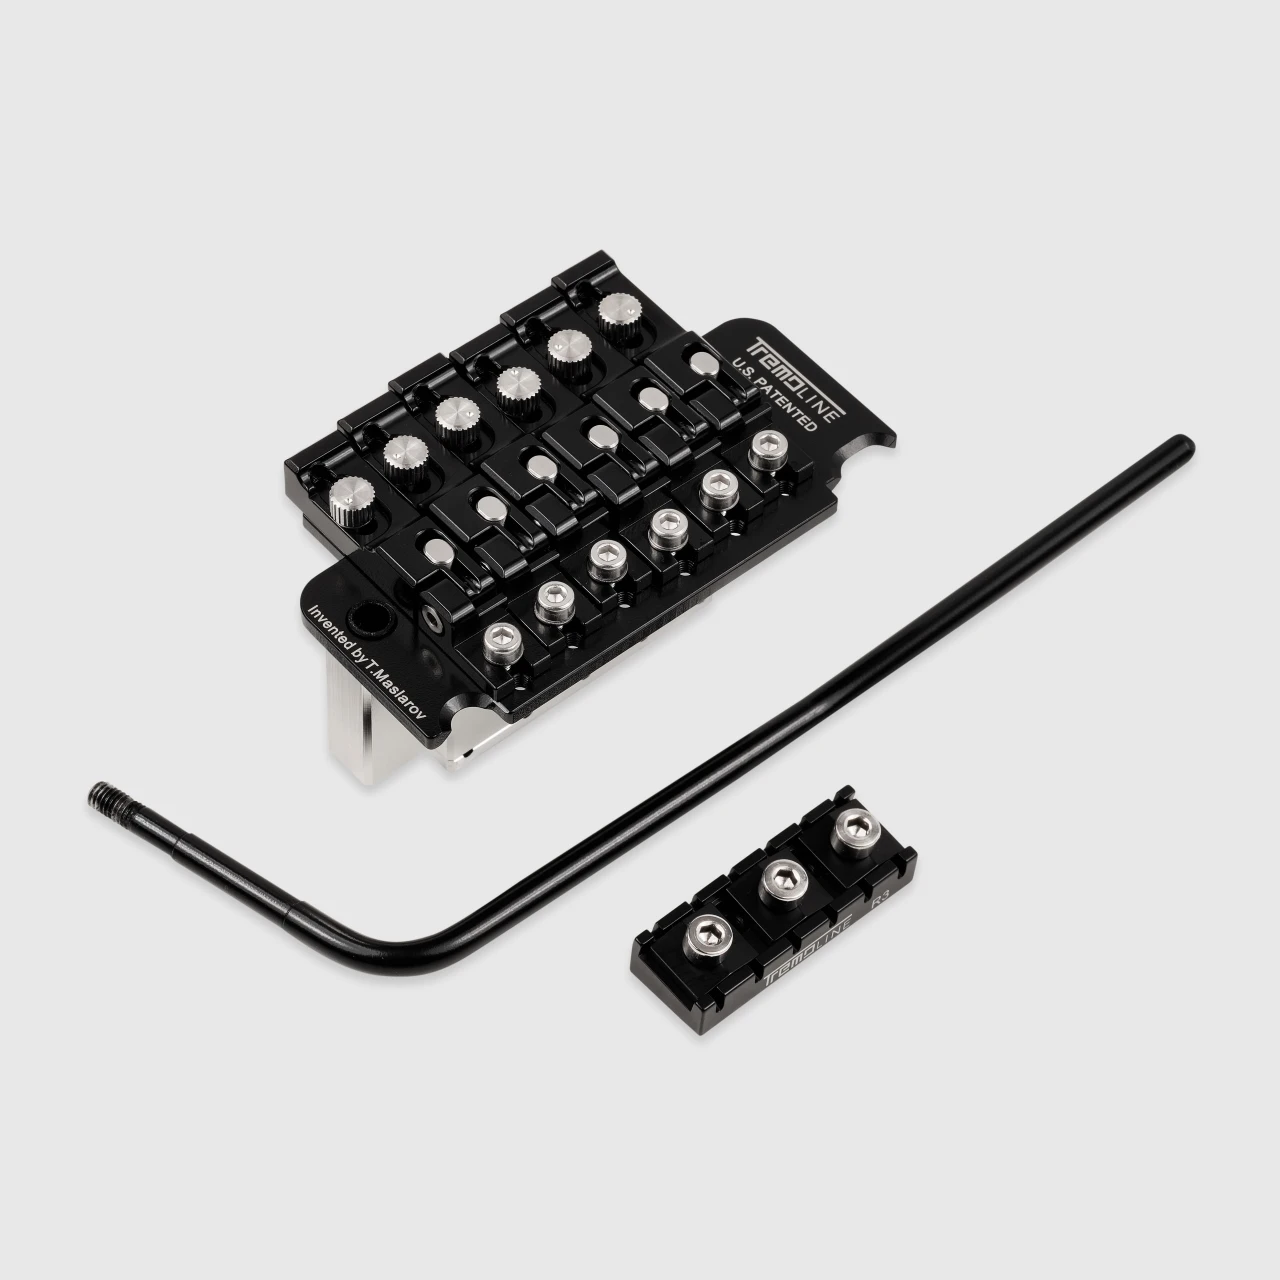 <img src=”Tremoline-Tremolo-system-flat-top-FT36T-R3-BS_1” width="1280" height="1280" alt=”Tremoline FT36T double locking tremolo set with locking nut” />